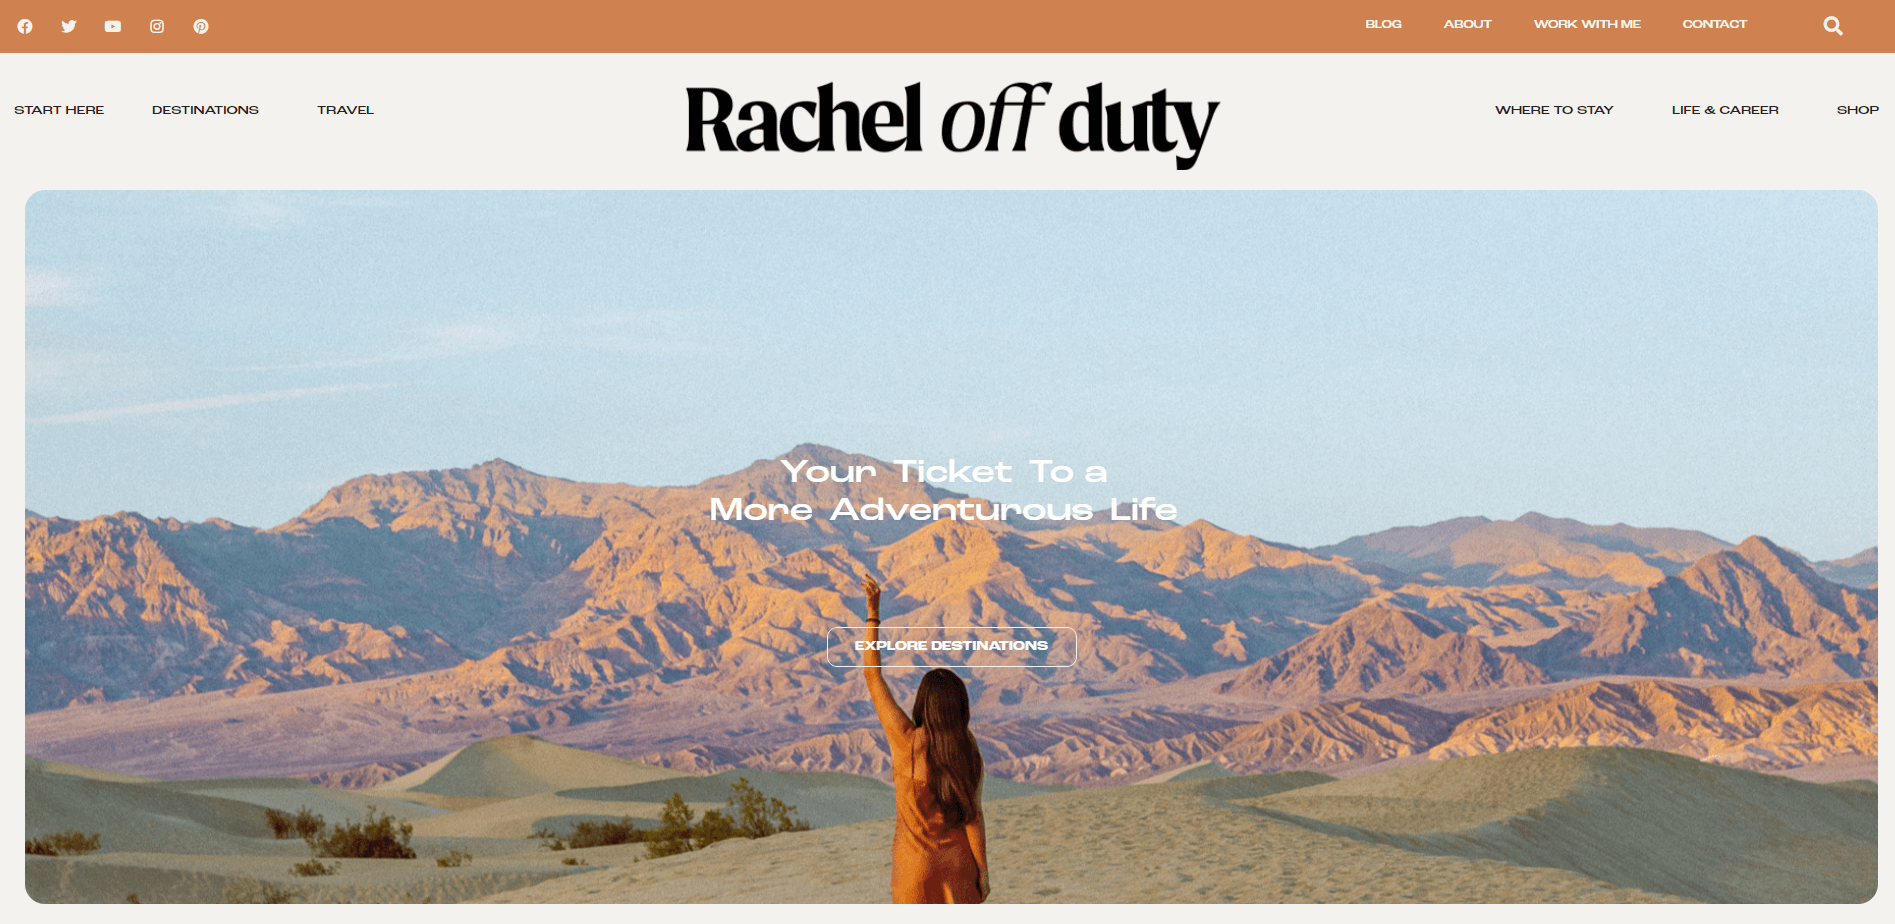 A website using muted browns and pinks in its color scheme.